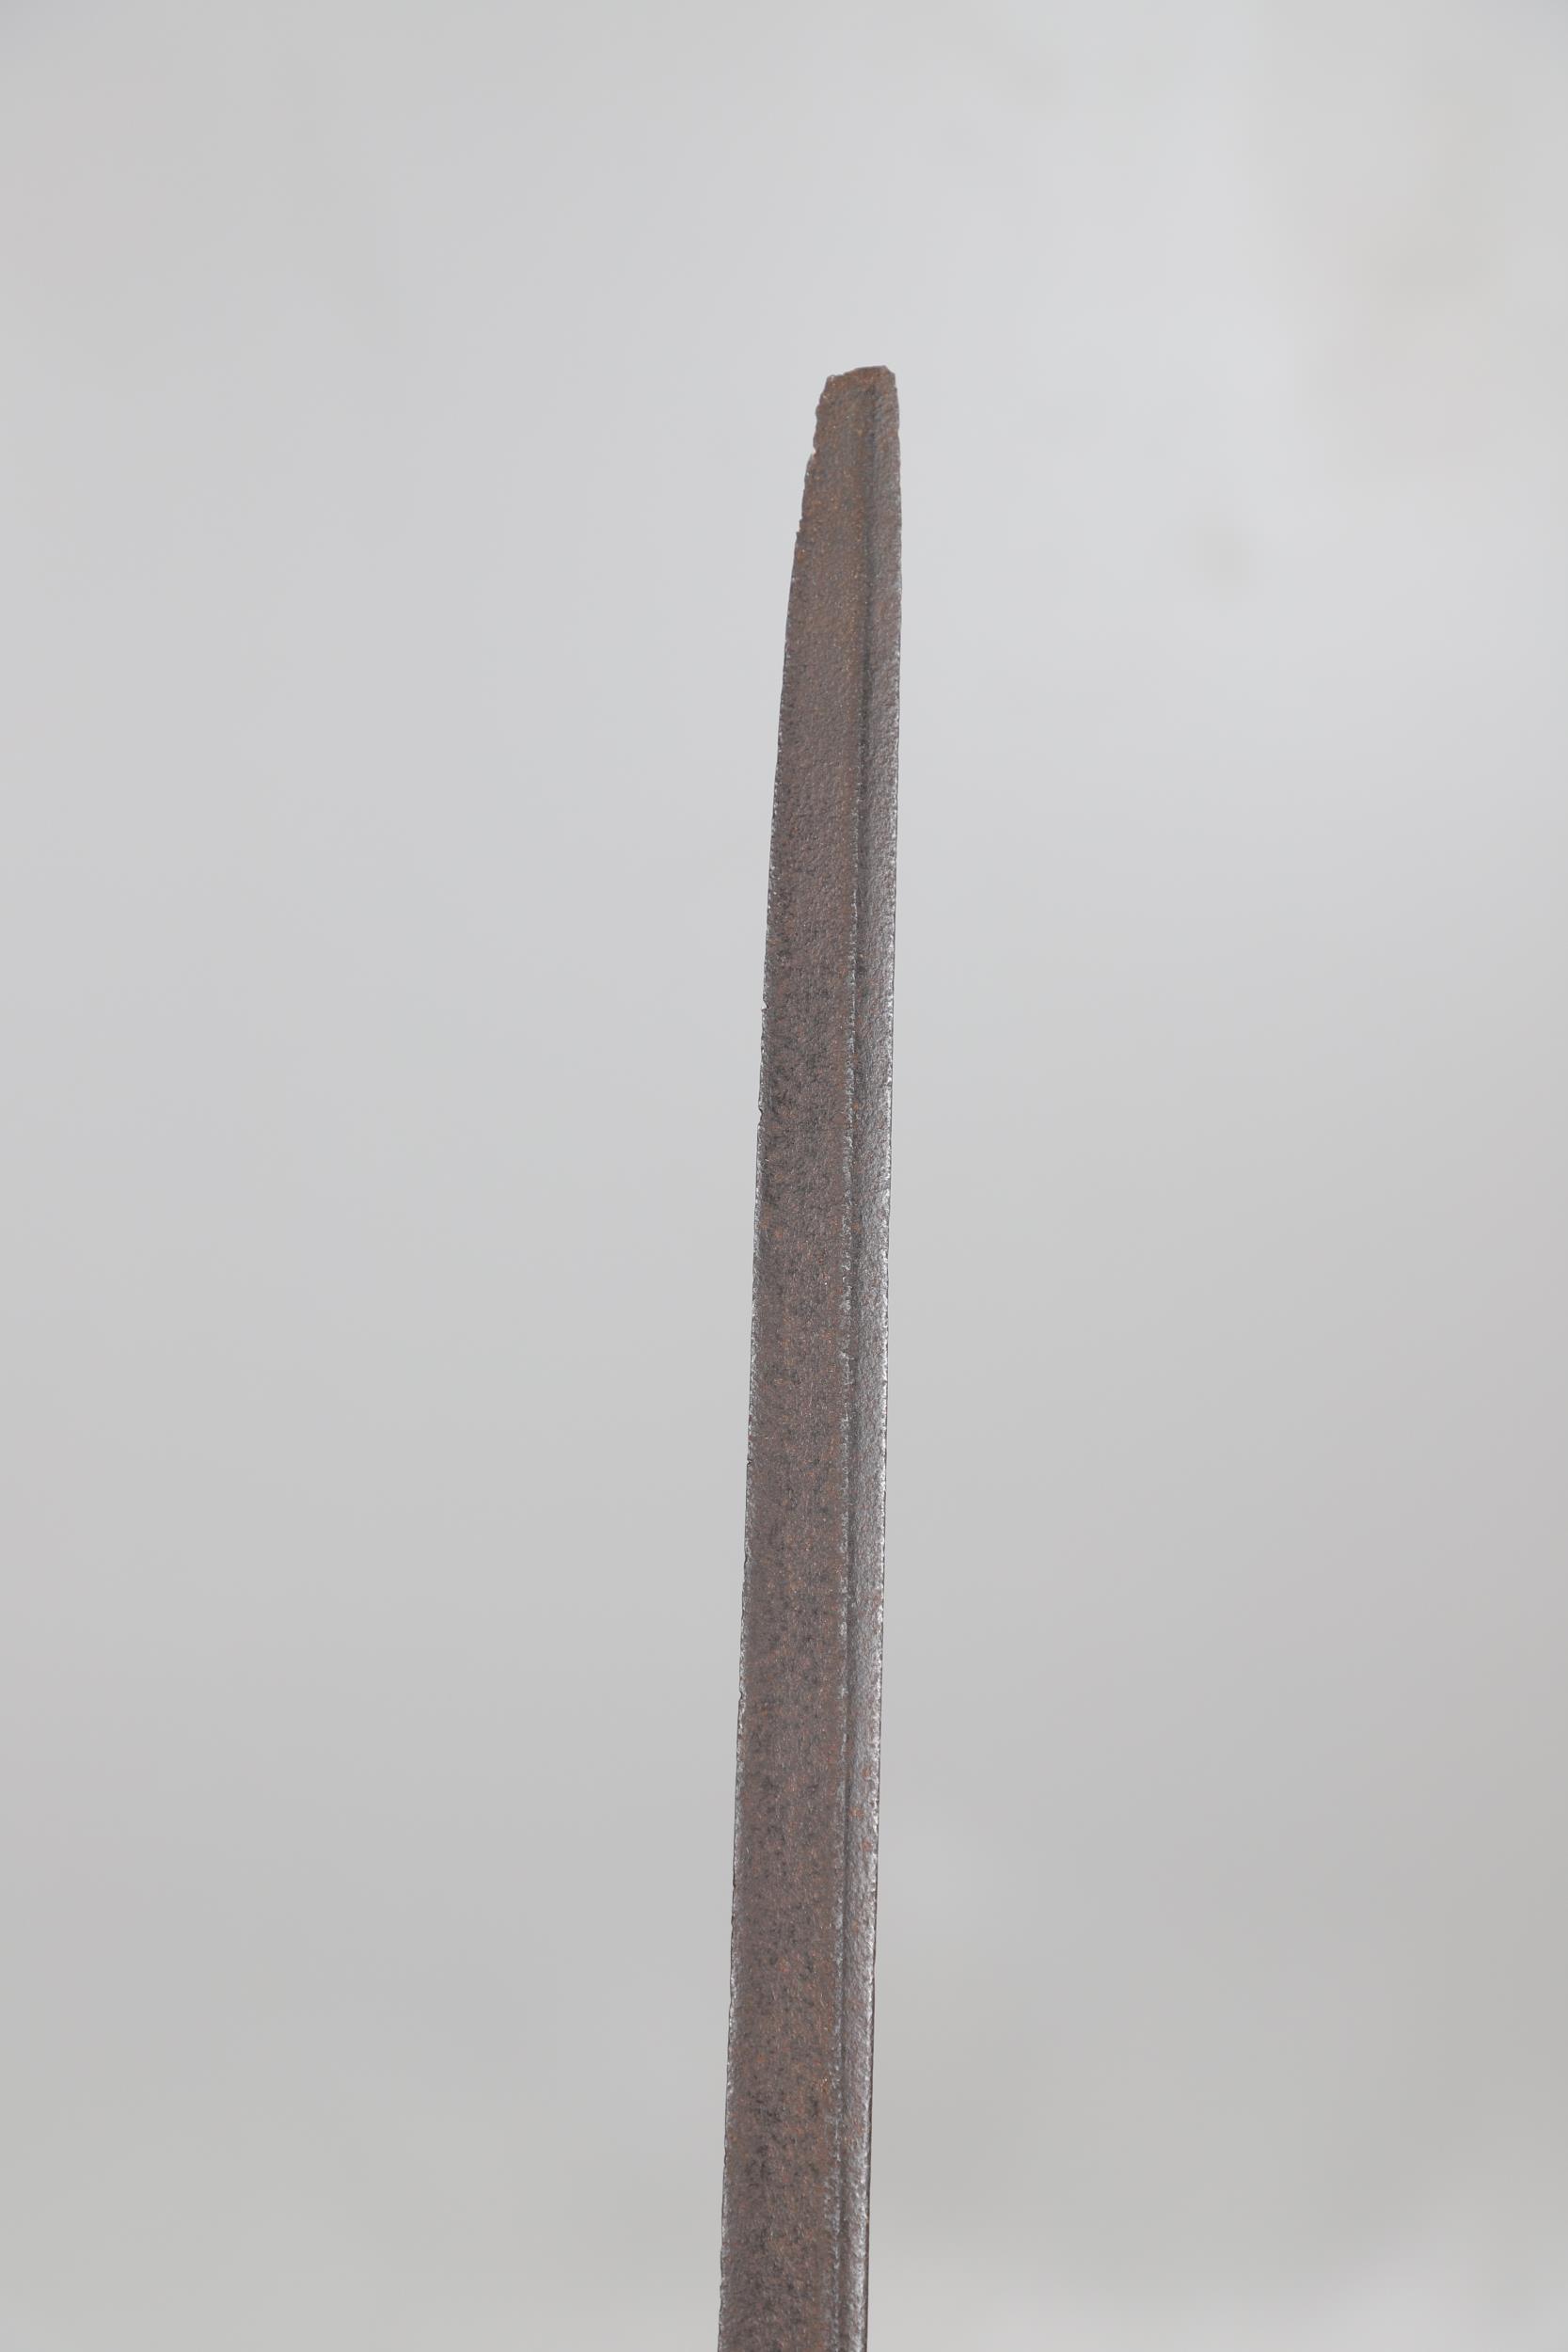 AN EAST INDIA COMPANY OFFICER'S 1822 PATTERN SWORD. - Image 10 of 10